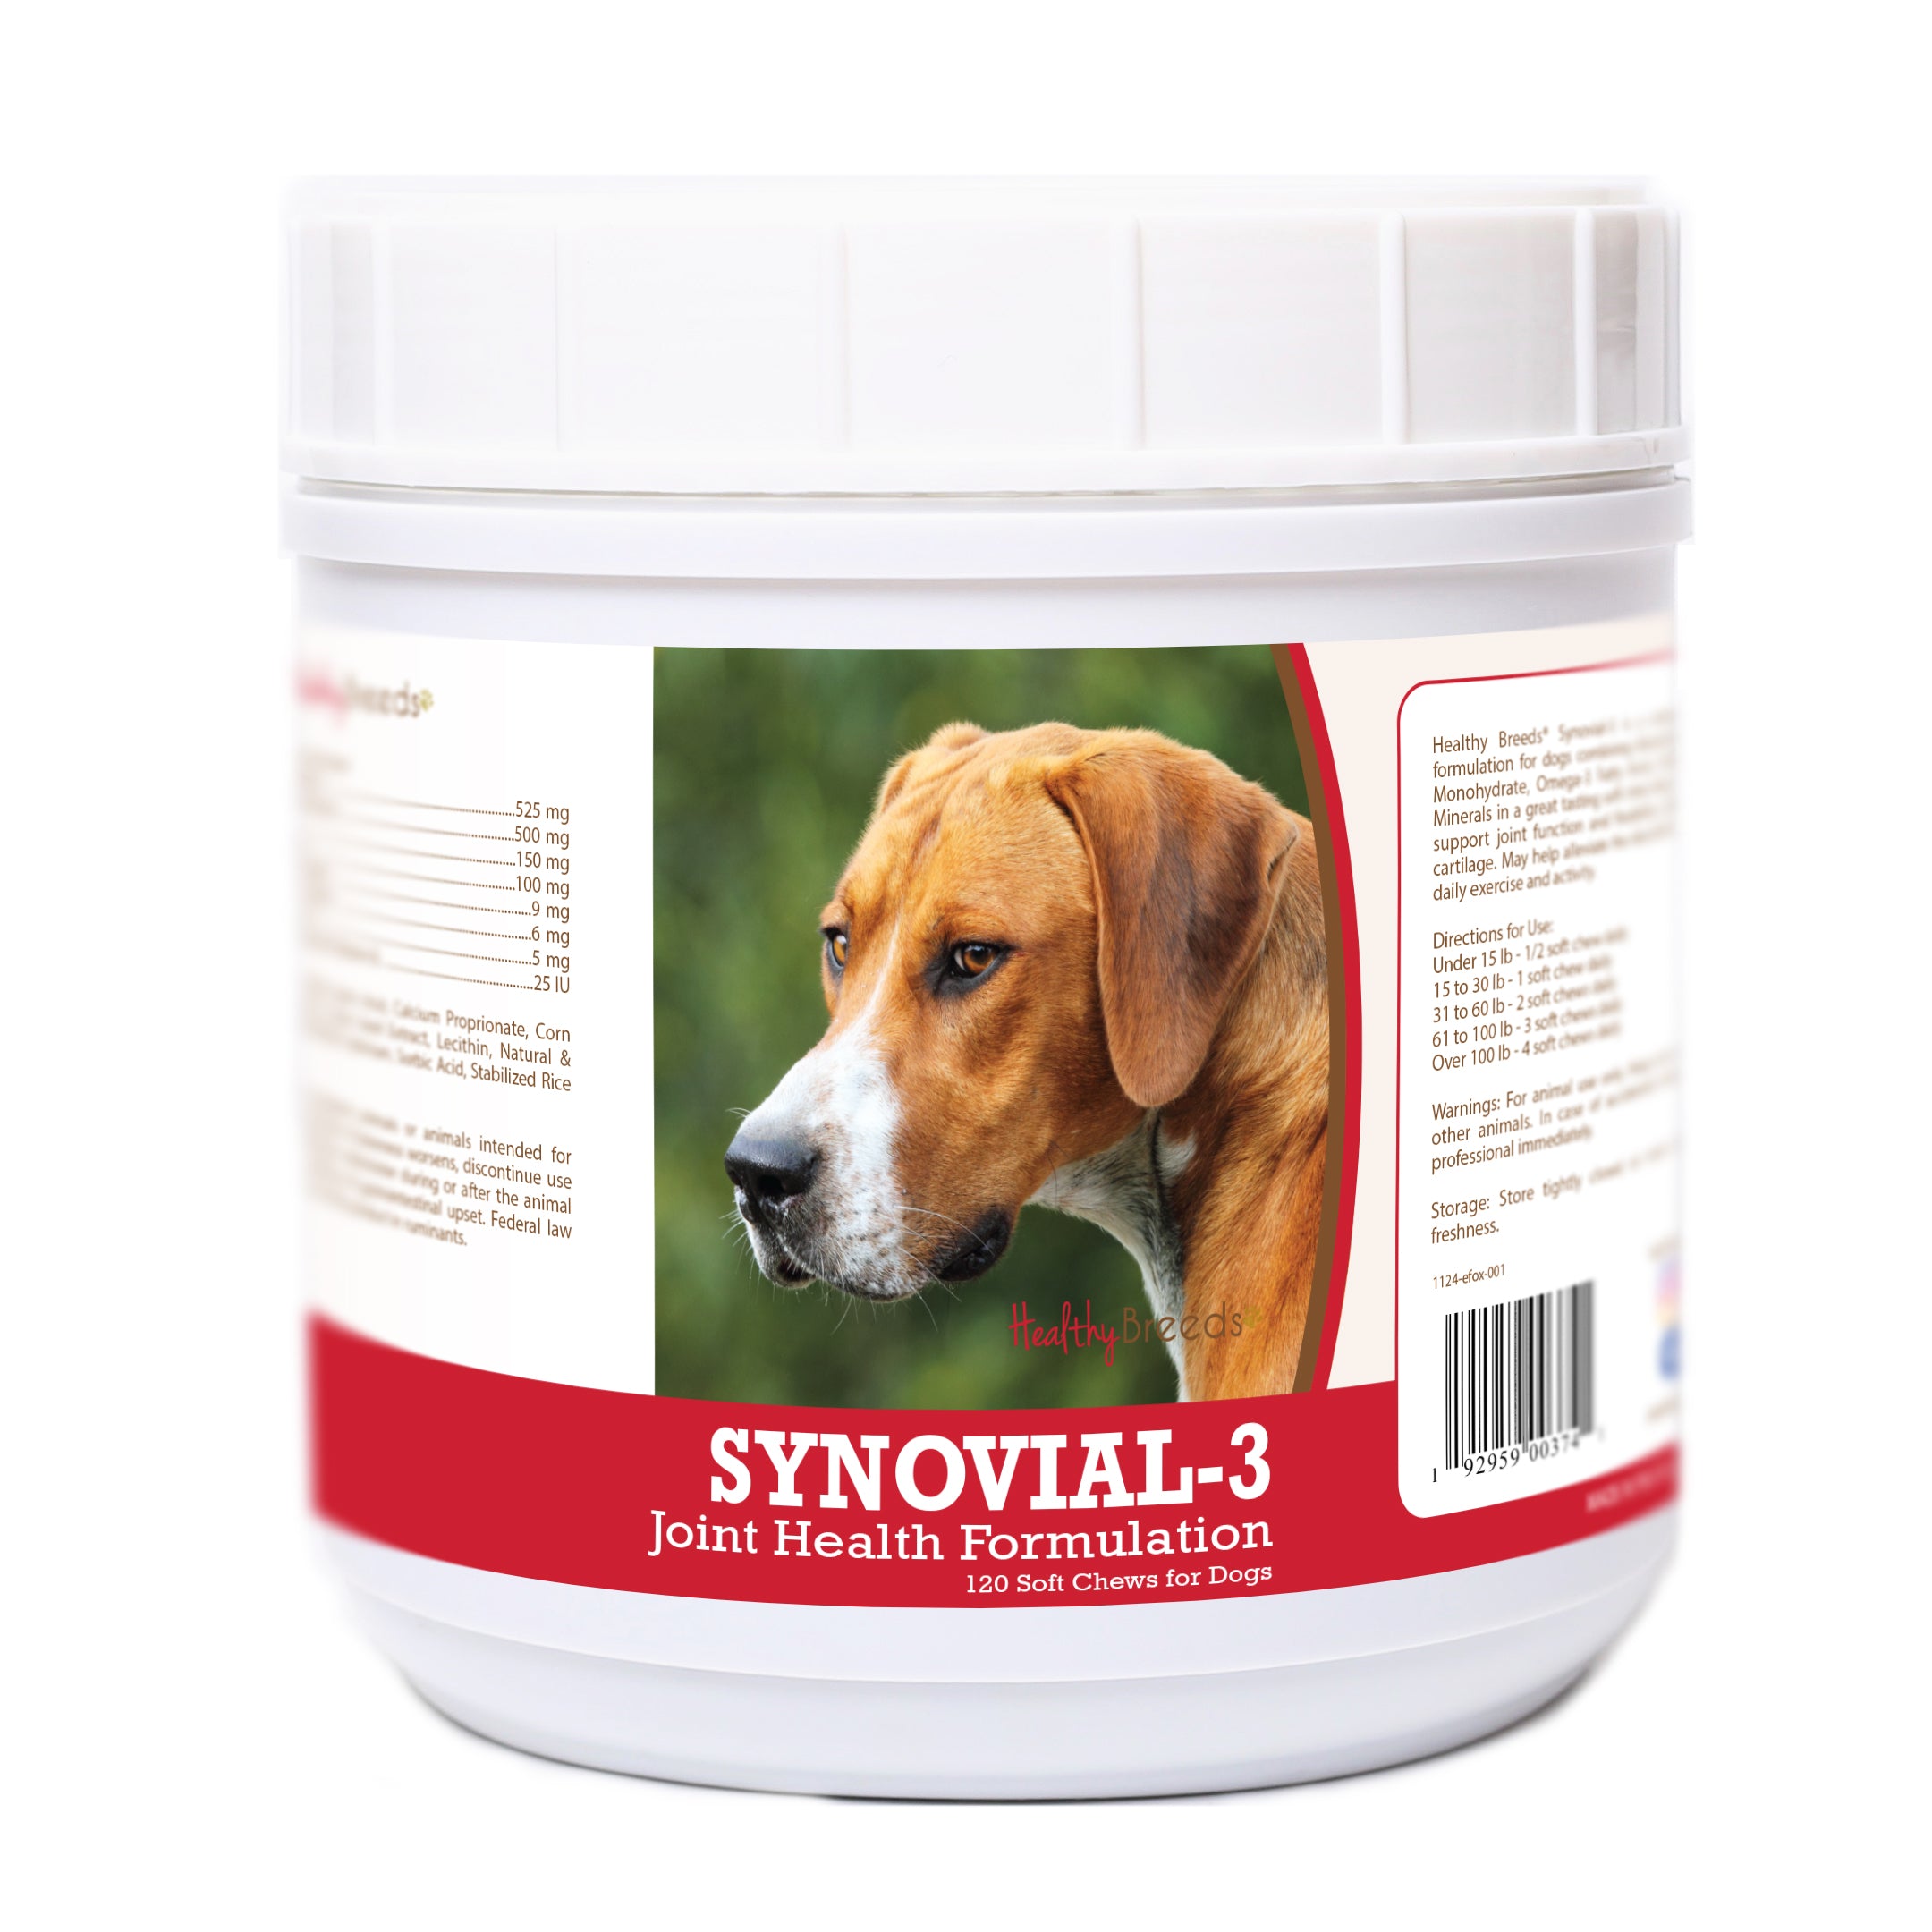 English Foxhound Synovial-3 Joint Health Formulation Soft Chews 120 Count